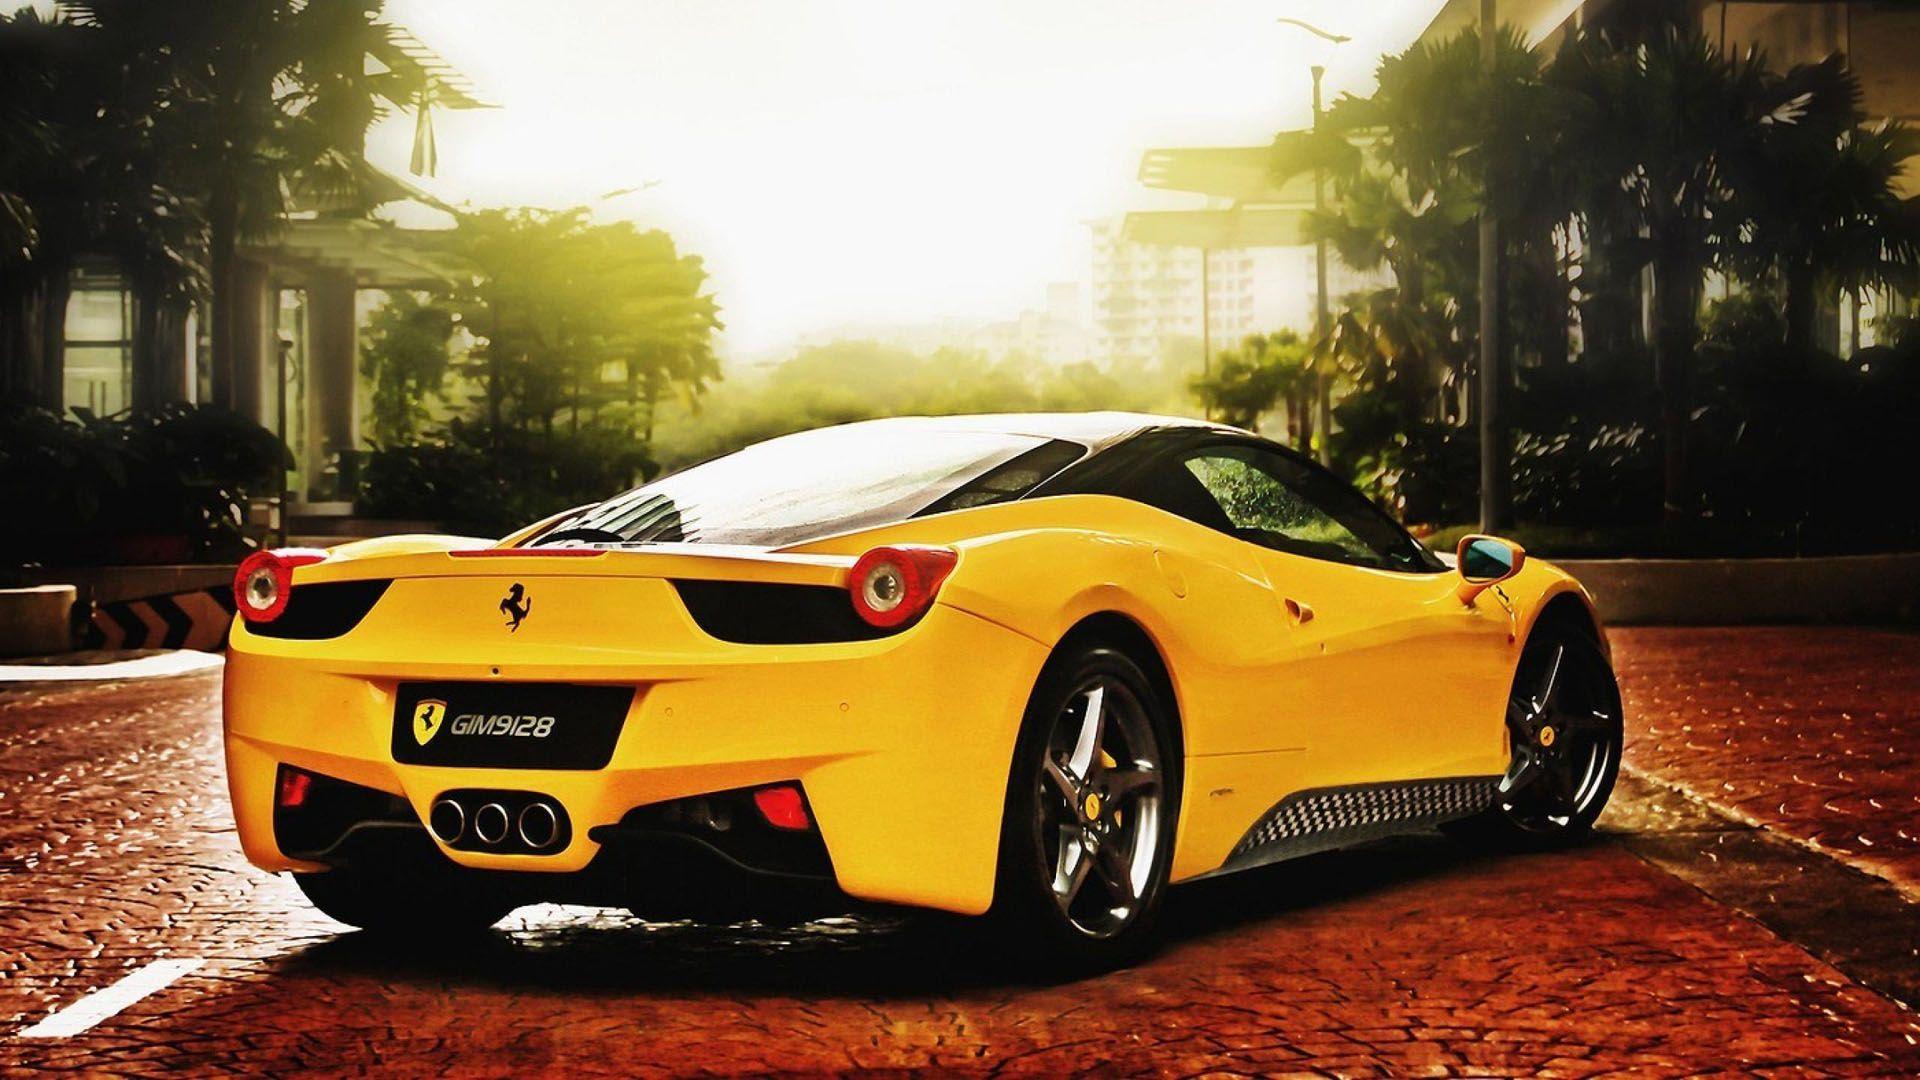 Exotic Cars Wallpapers HD - Wallpaper Cave
